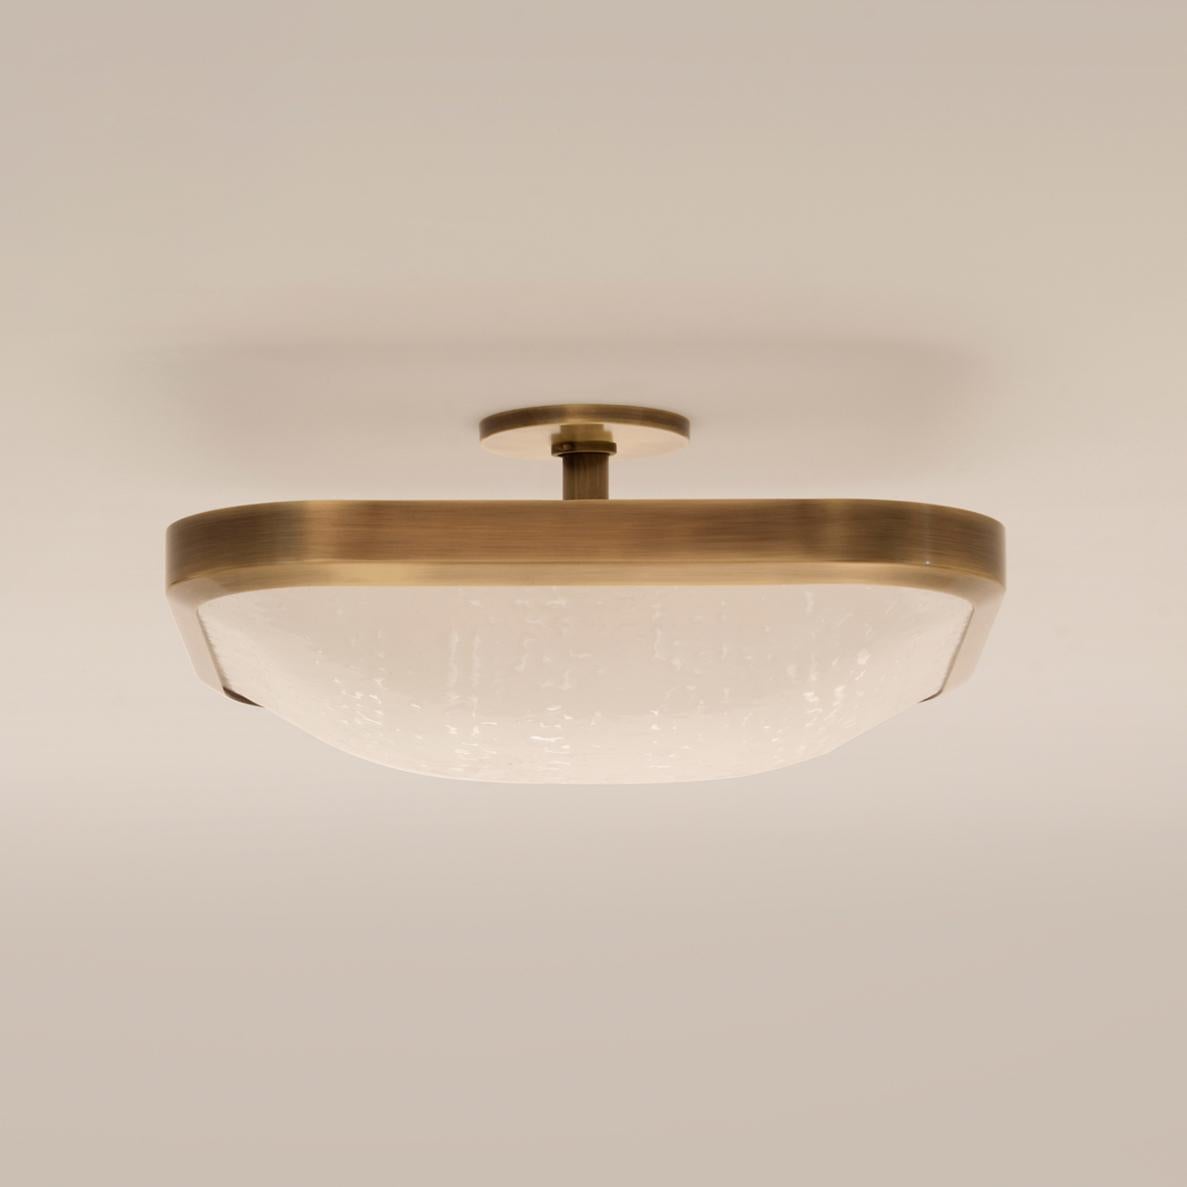 Uno Square Ceiling Light by Gaspare Asaro-Satin Brass Finish For Sale 4